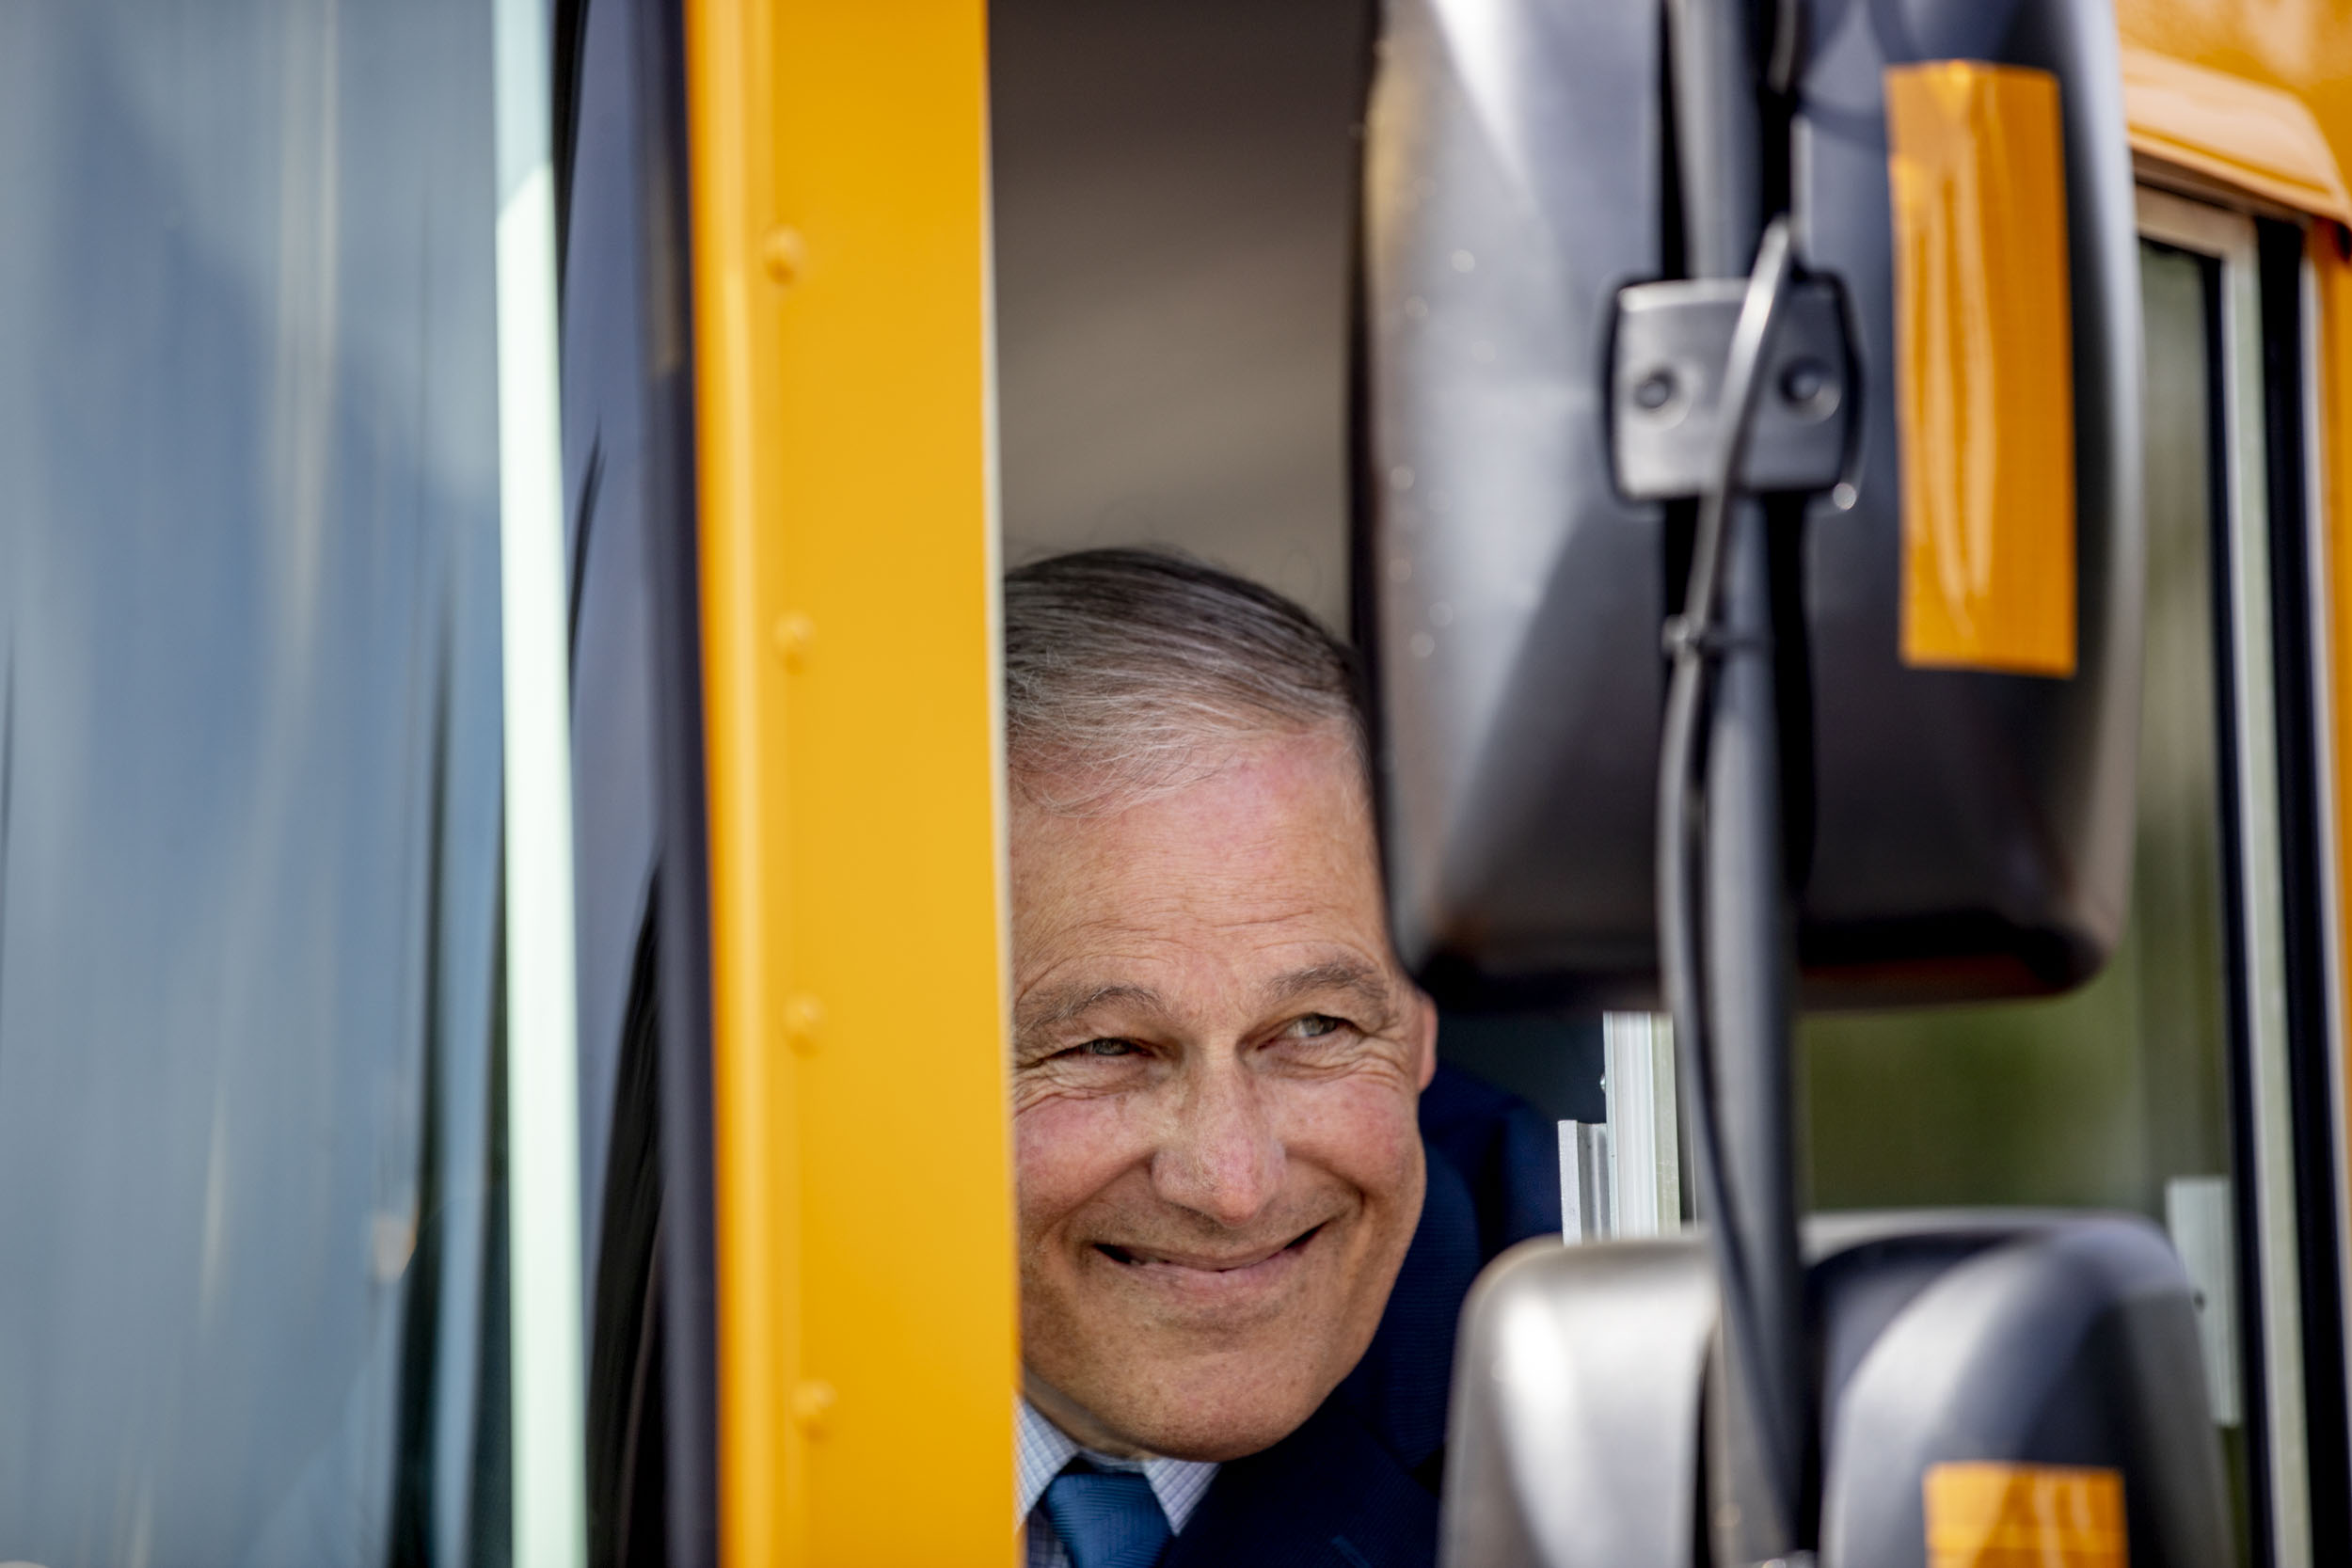 Governor Jay Inslee inside the first electric school bus in Washington state during an event at Franklin Pierce High School in Tacoma on June 17, 2019. (Photo by Dorothy Edwards/Crosscut)